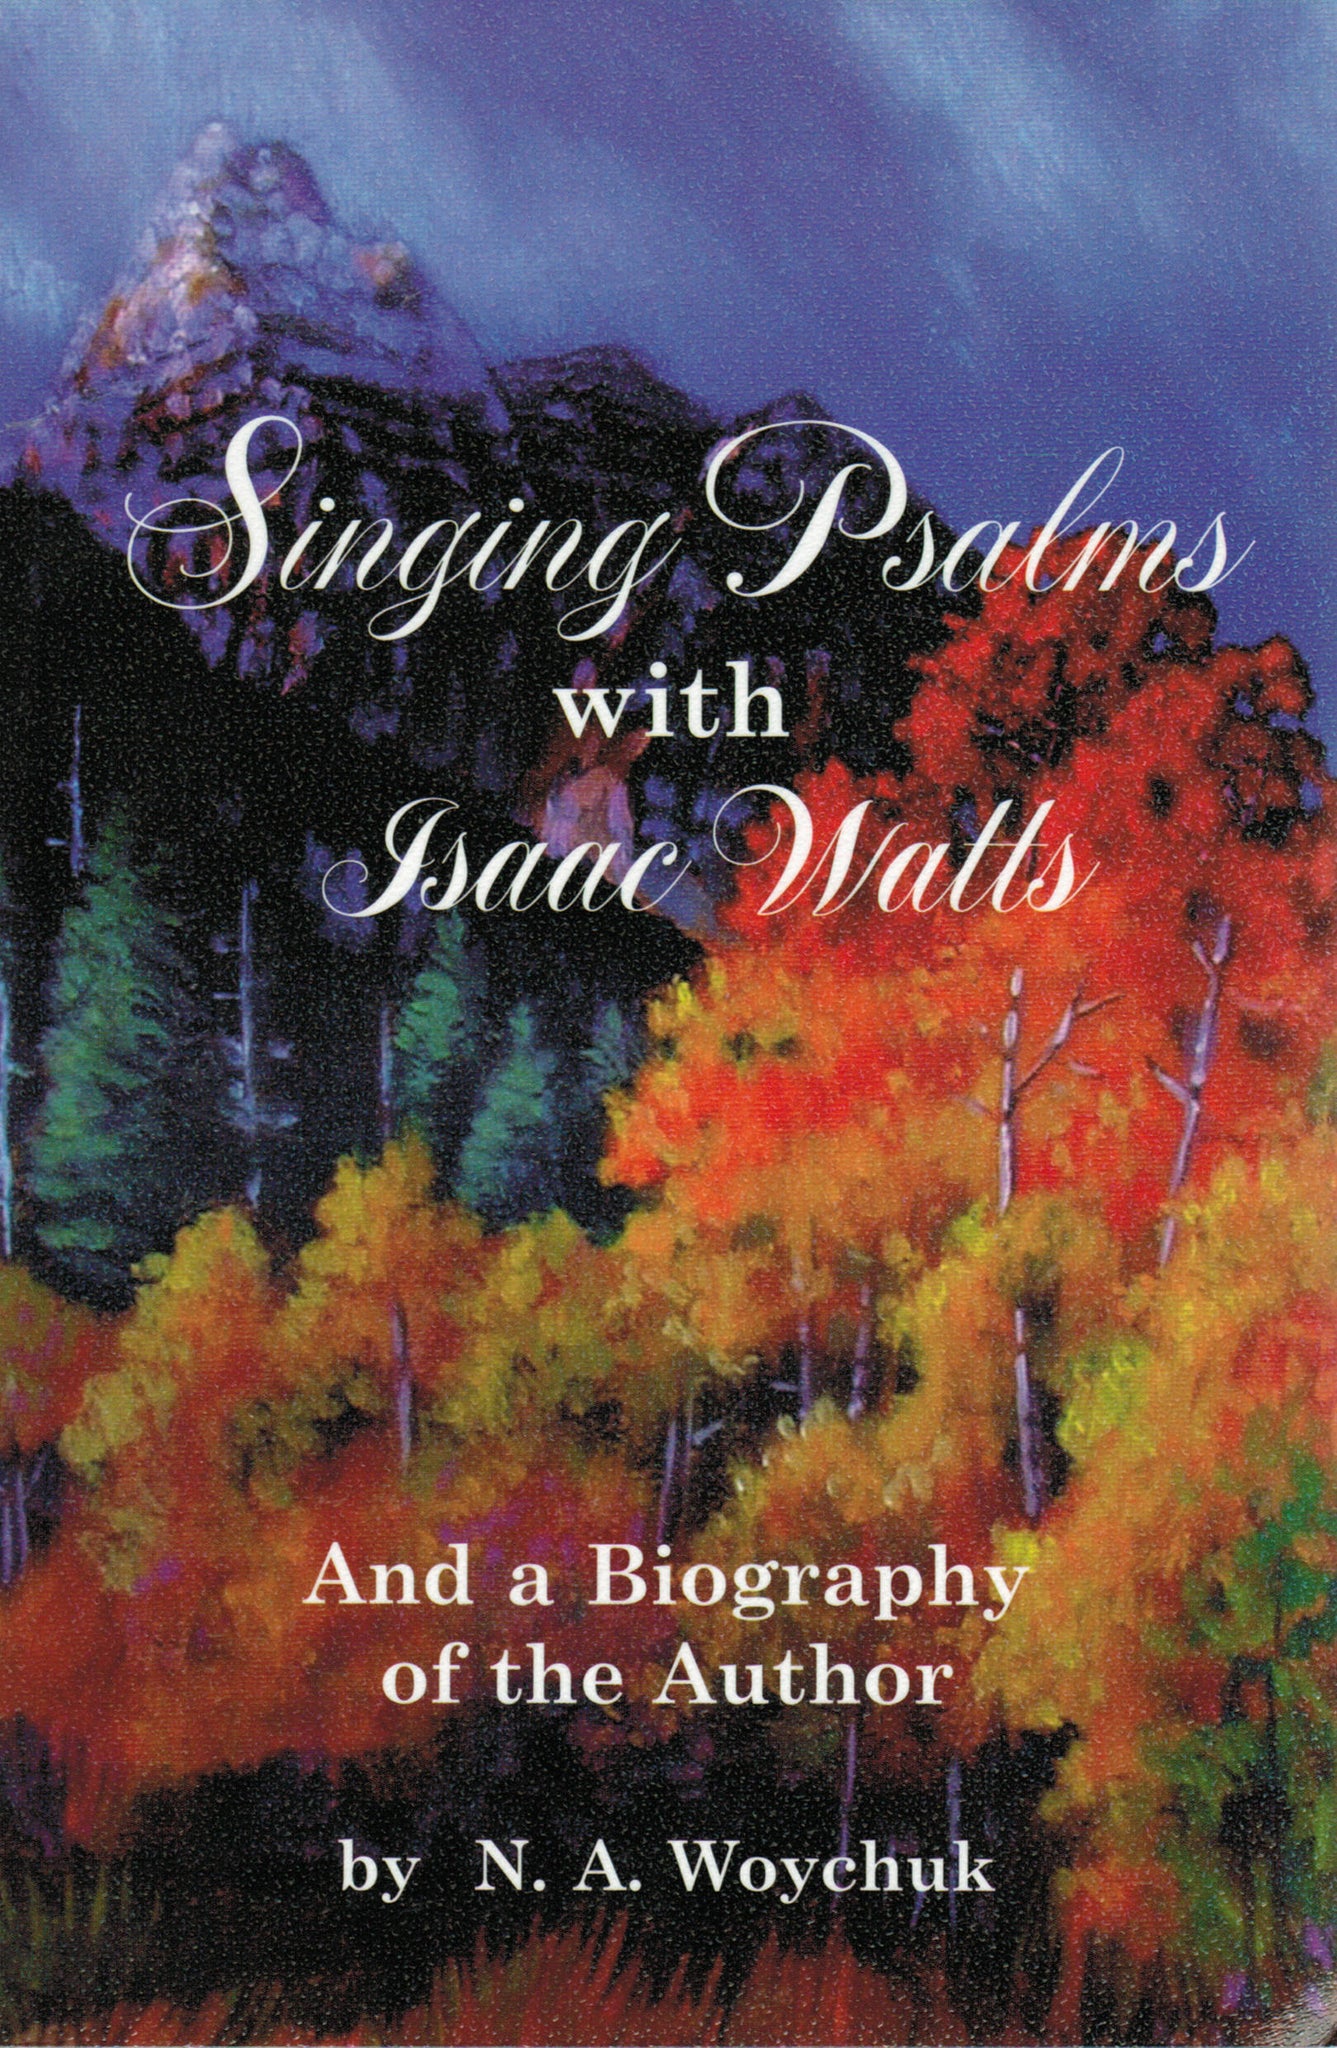 Singing Psalms with Isaac Watts (And a Biography of the Author)